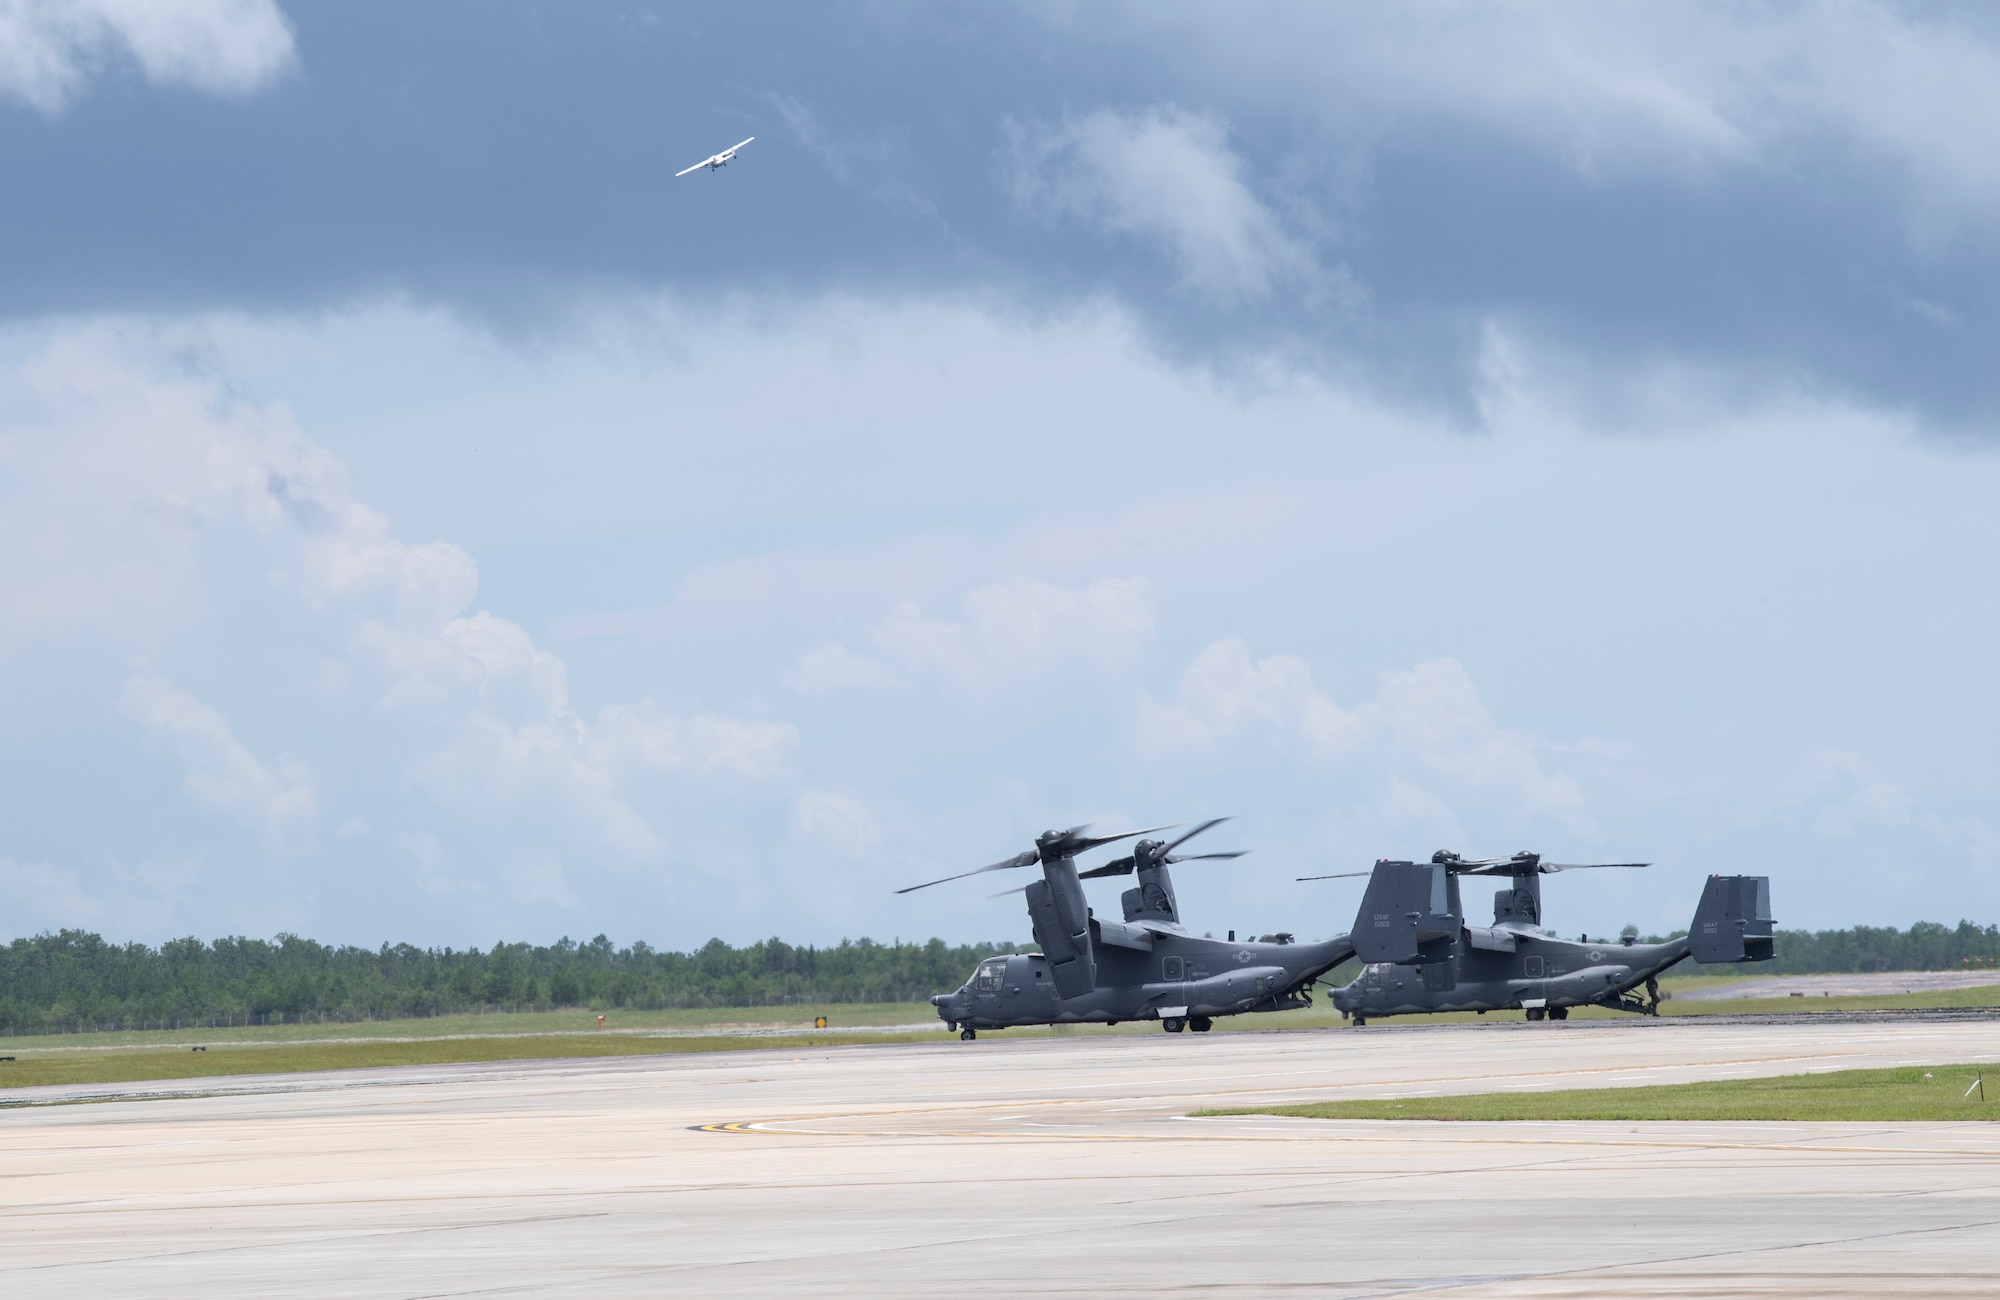 Two CV-22 Osprey park on the flightline as a C-146A Wolfhound flies overhead, at Duke Field, Florida, July 21, 2021. Air Force Special Operations Command leverages capabilities like FARP to ensure Airmen have multiple tools to accomplish a refueling mission in any environment, no matter how austere. (U.S. Air Force photo by Staff Sgt. Janiqua P. Robinson)